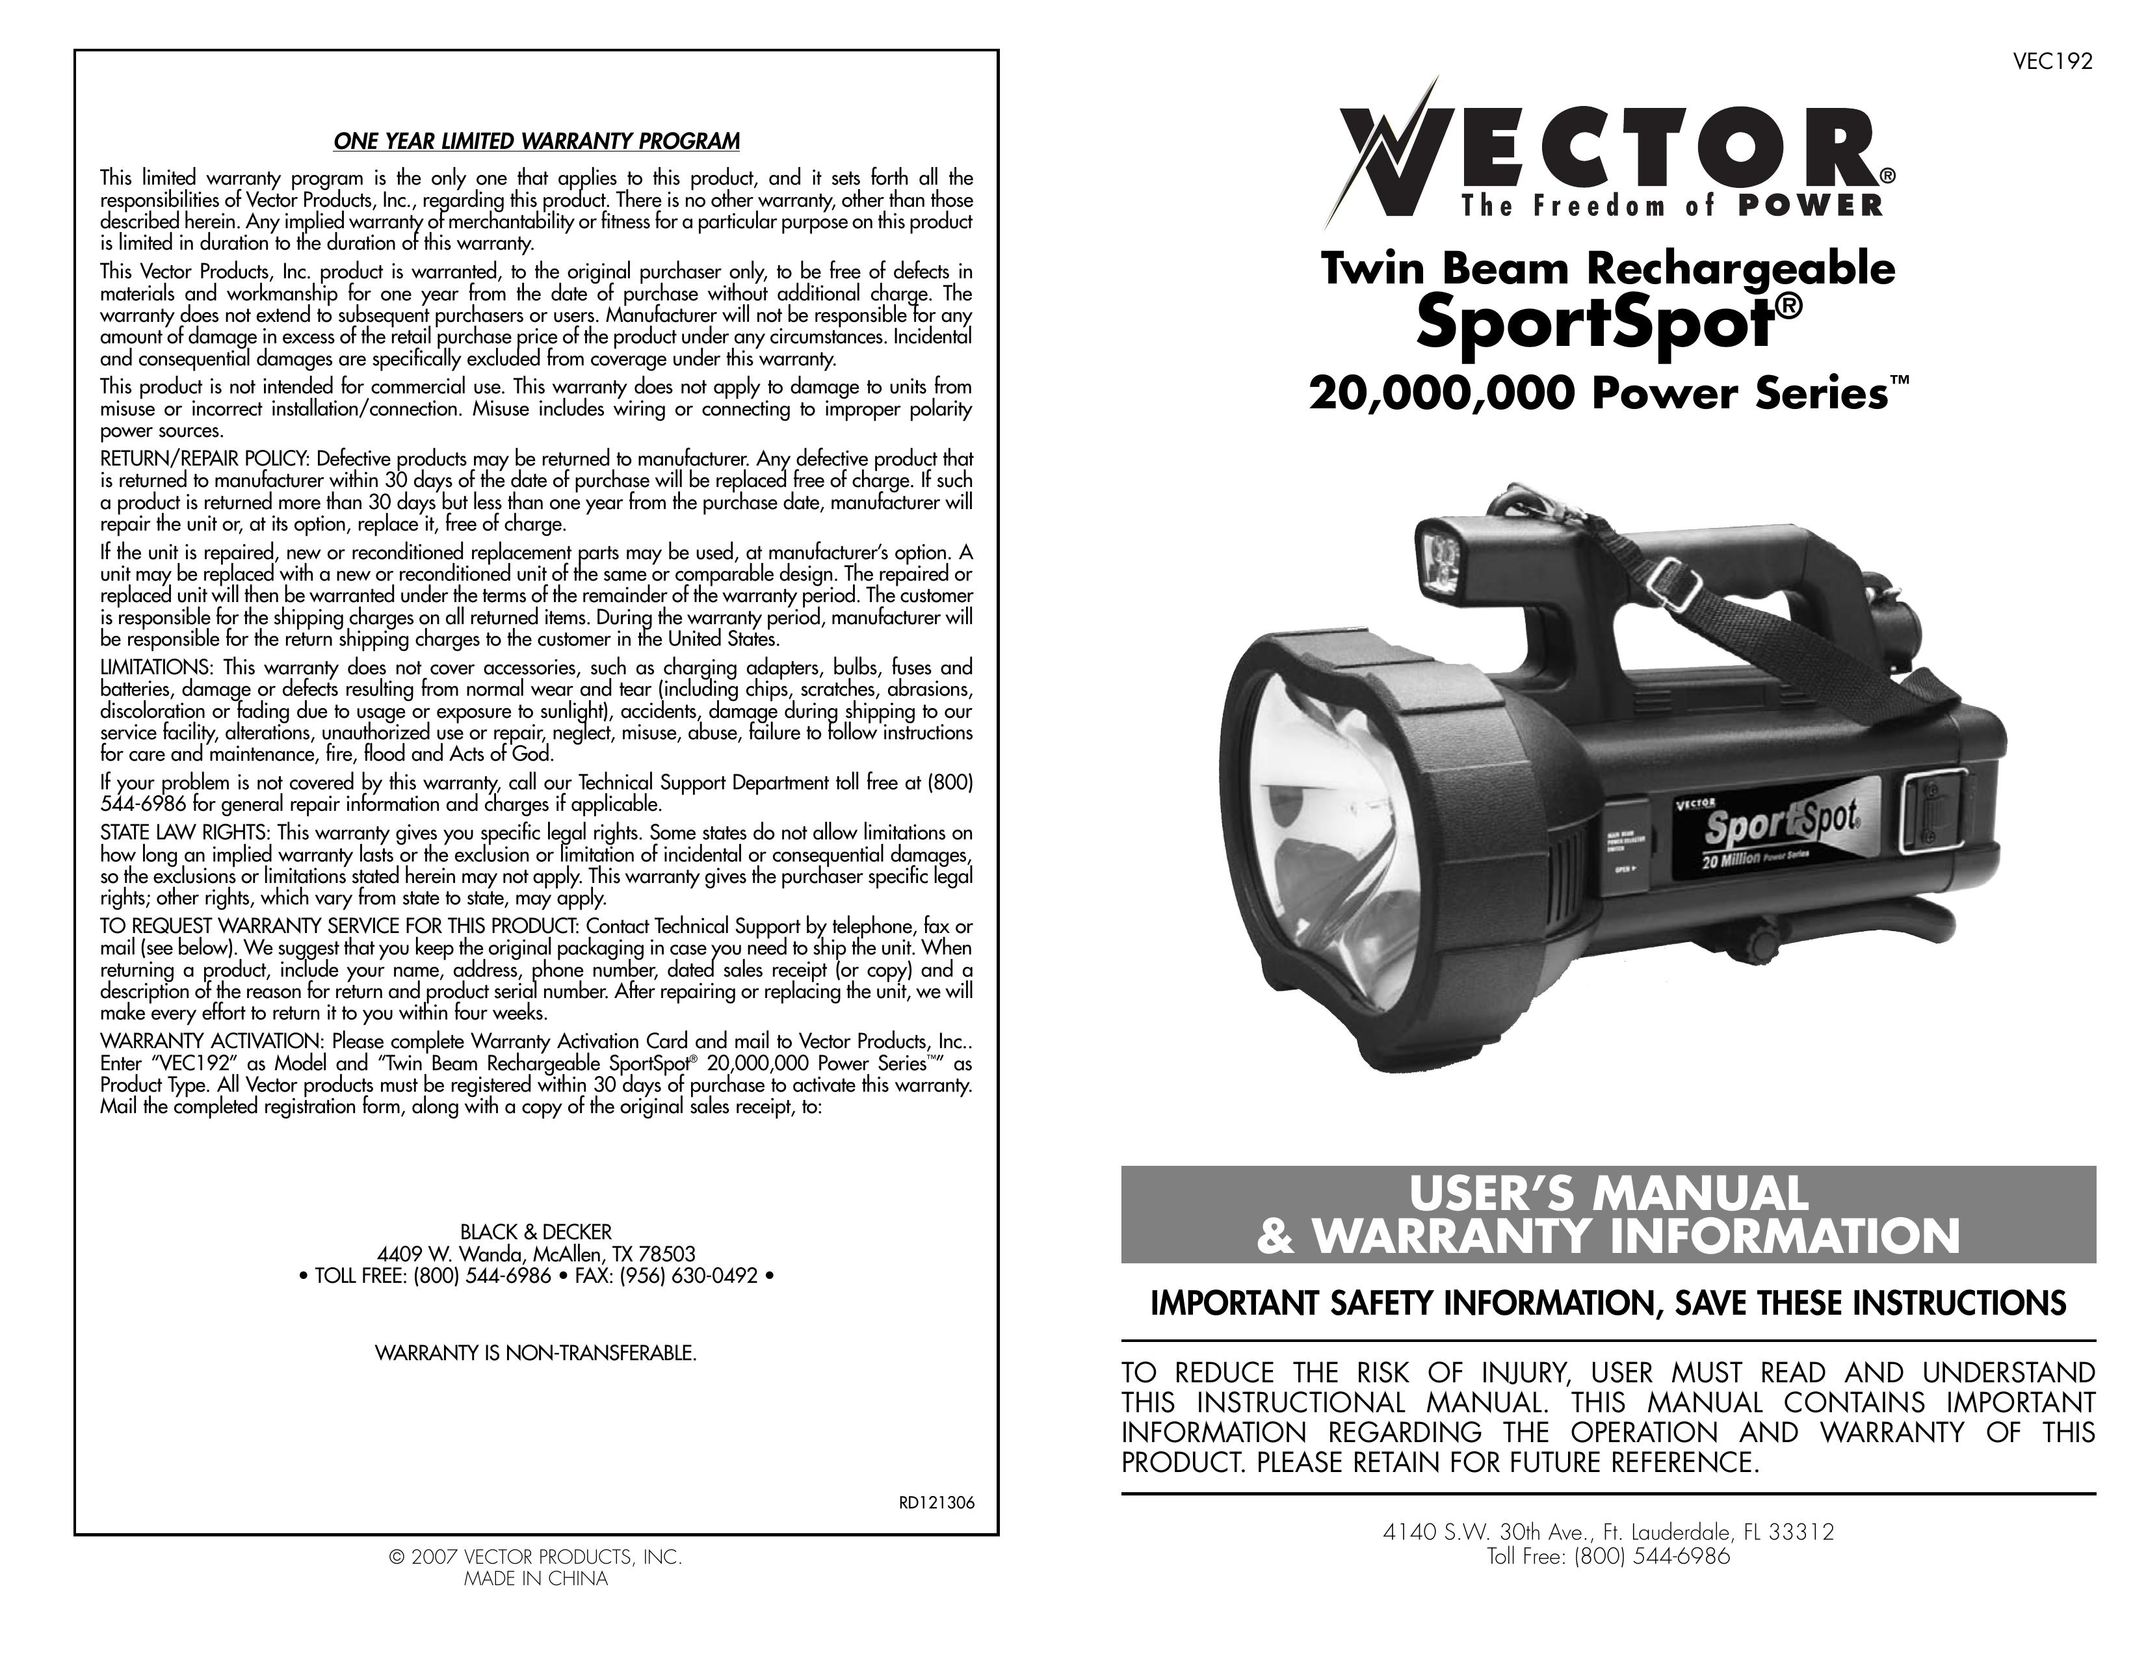 Vector VEC192 Home Safety Product User Manual